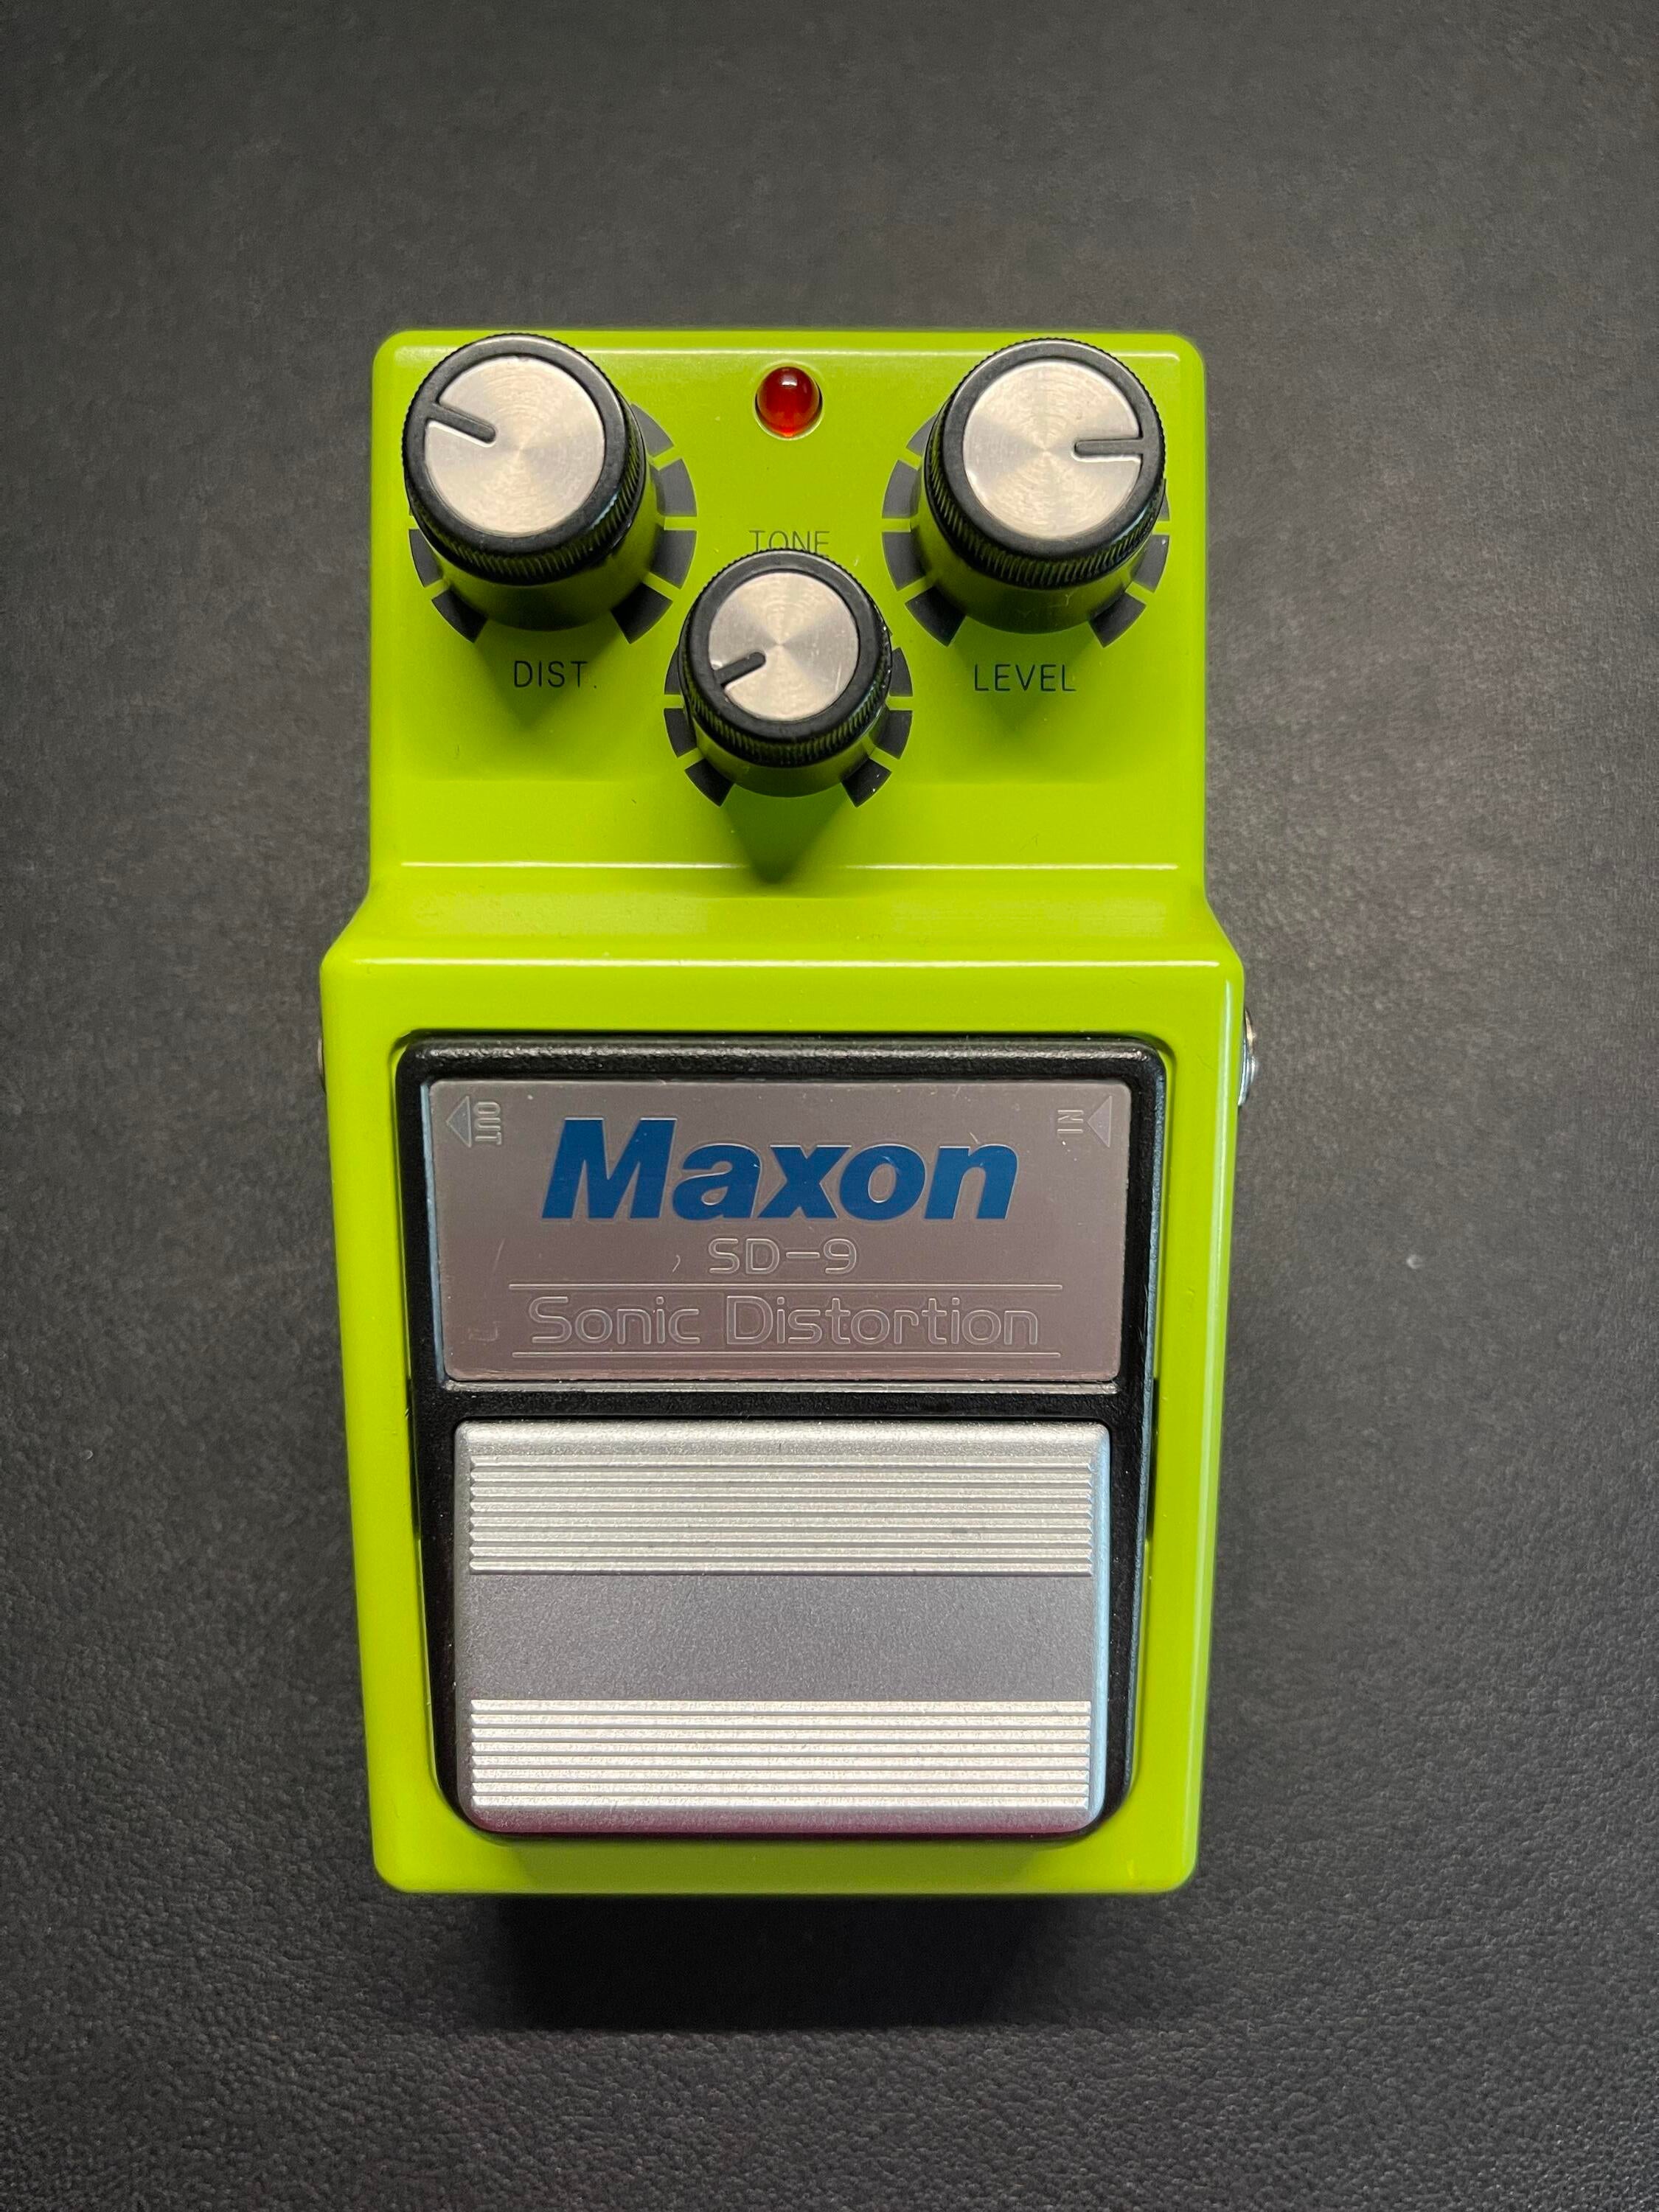 Used Maxon SD-9 Sonic Distortion | Gear Exchange